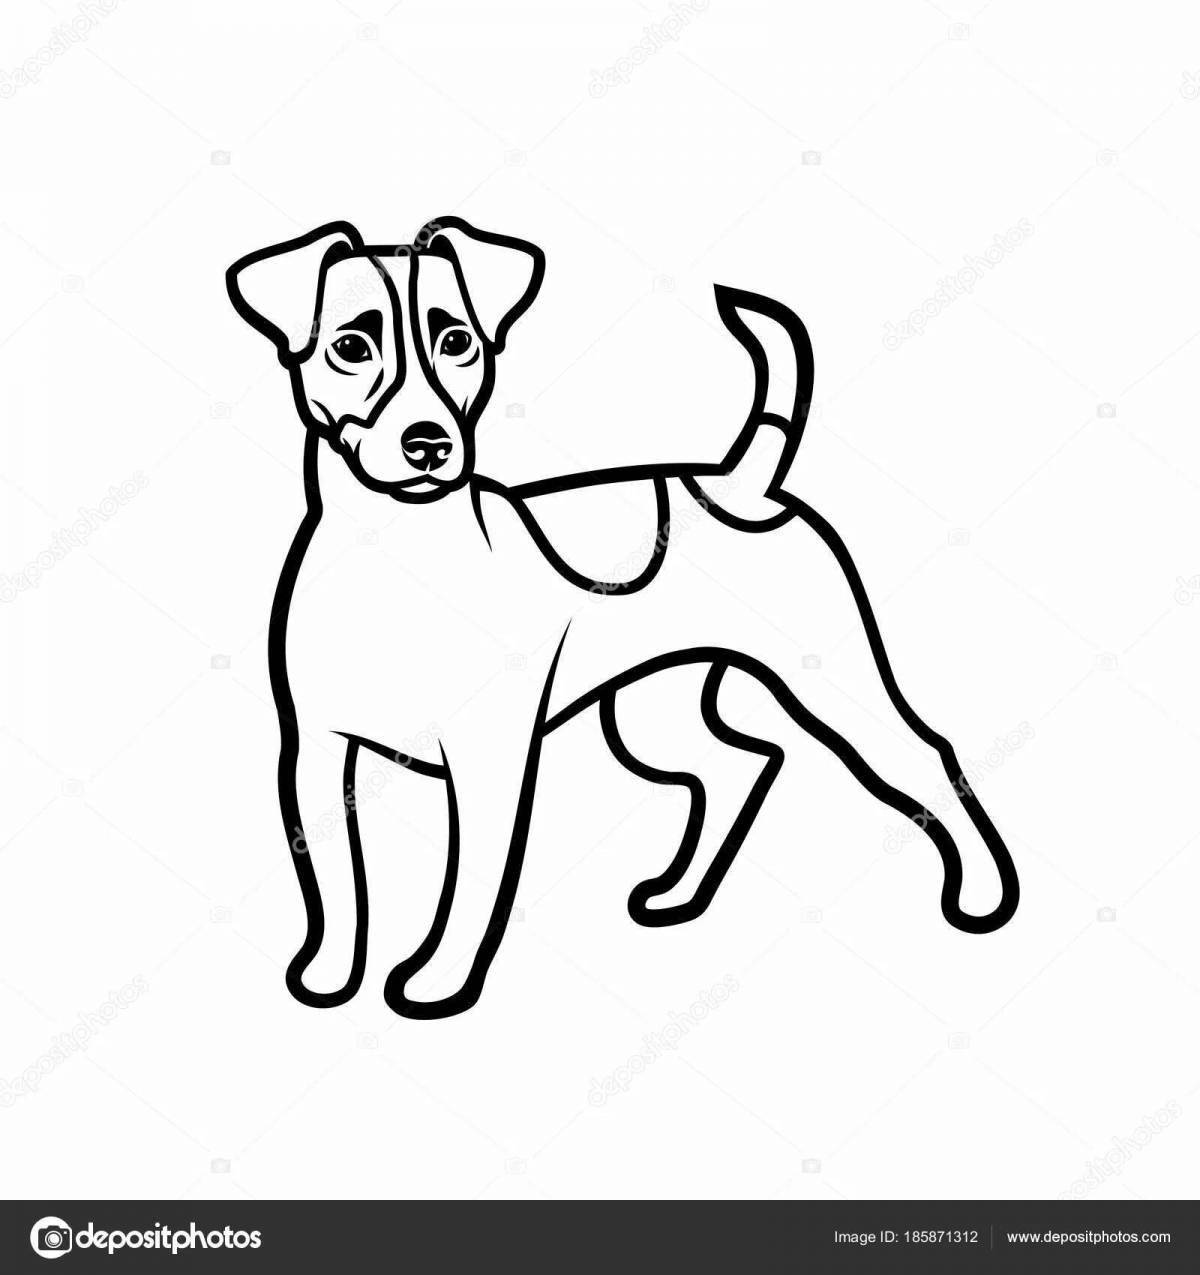 Jack russell terrier coloring book